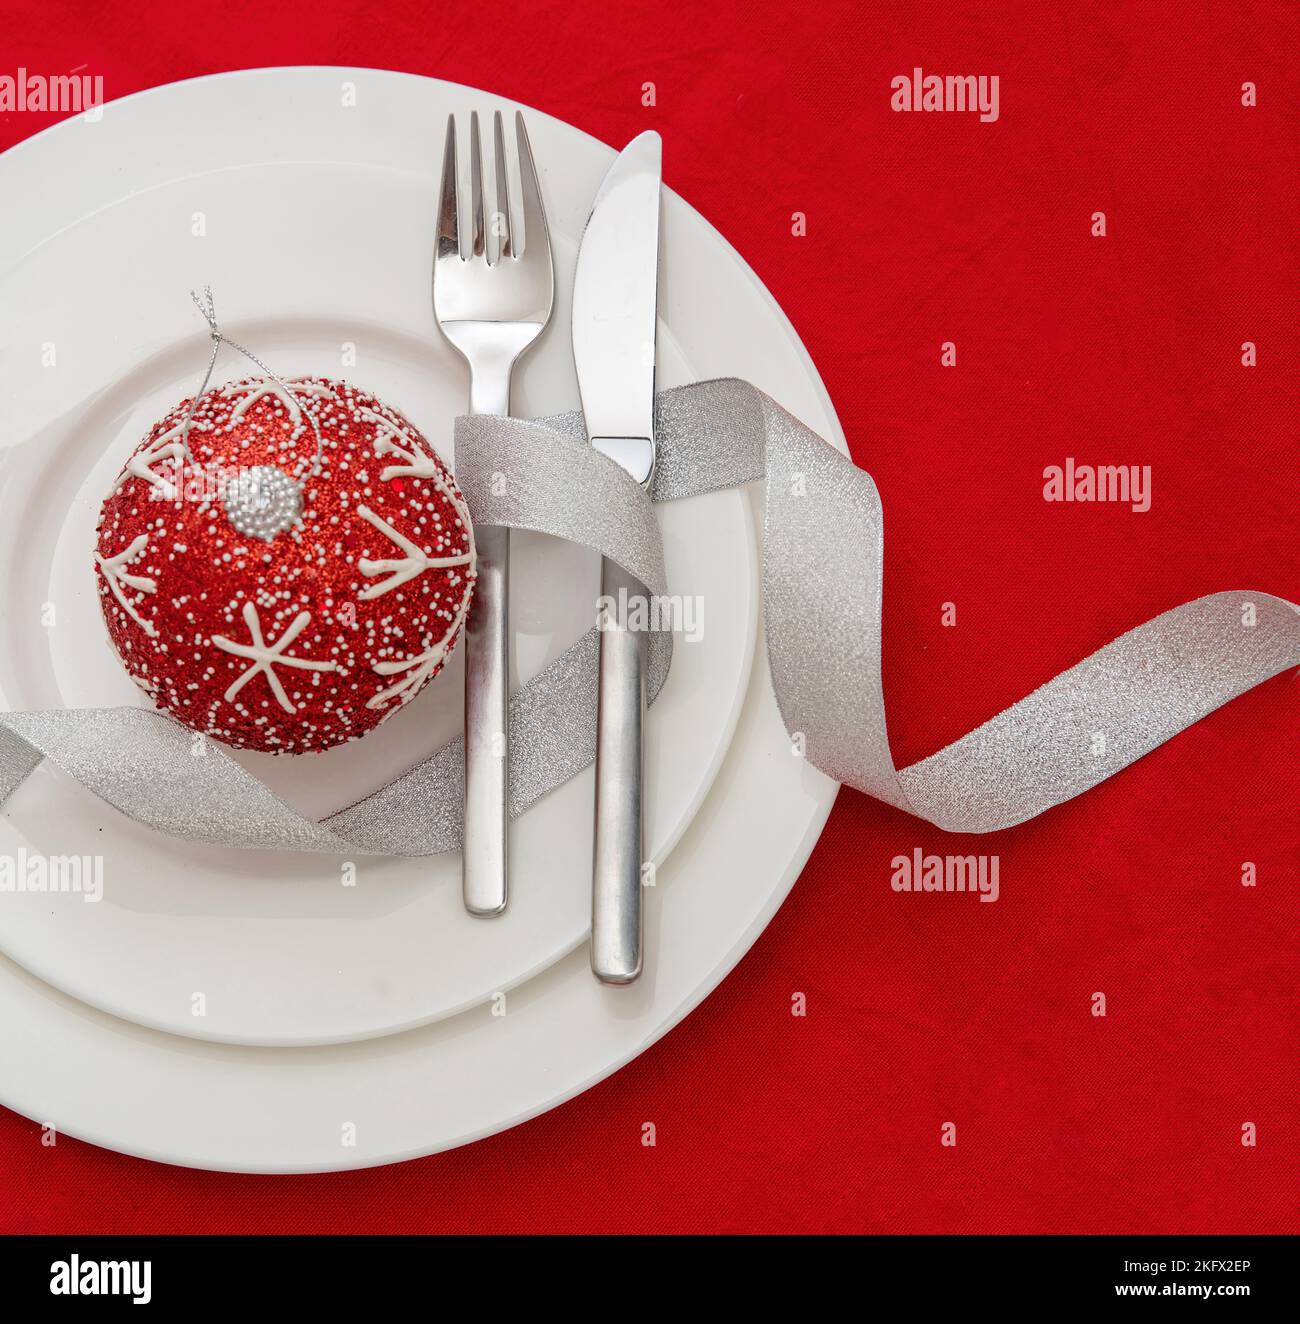 Christmas table setting. Xmas bauble and silver cutlery on plates, red background, top view. Holiday celebration dinner Stock Photo